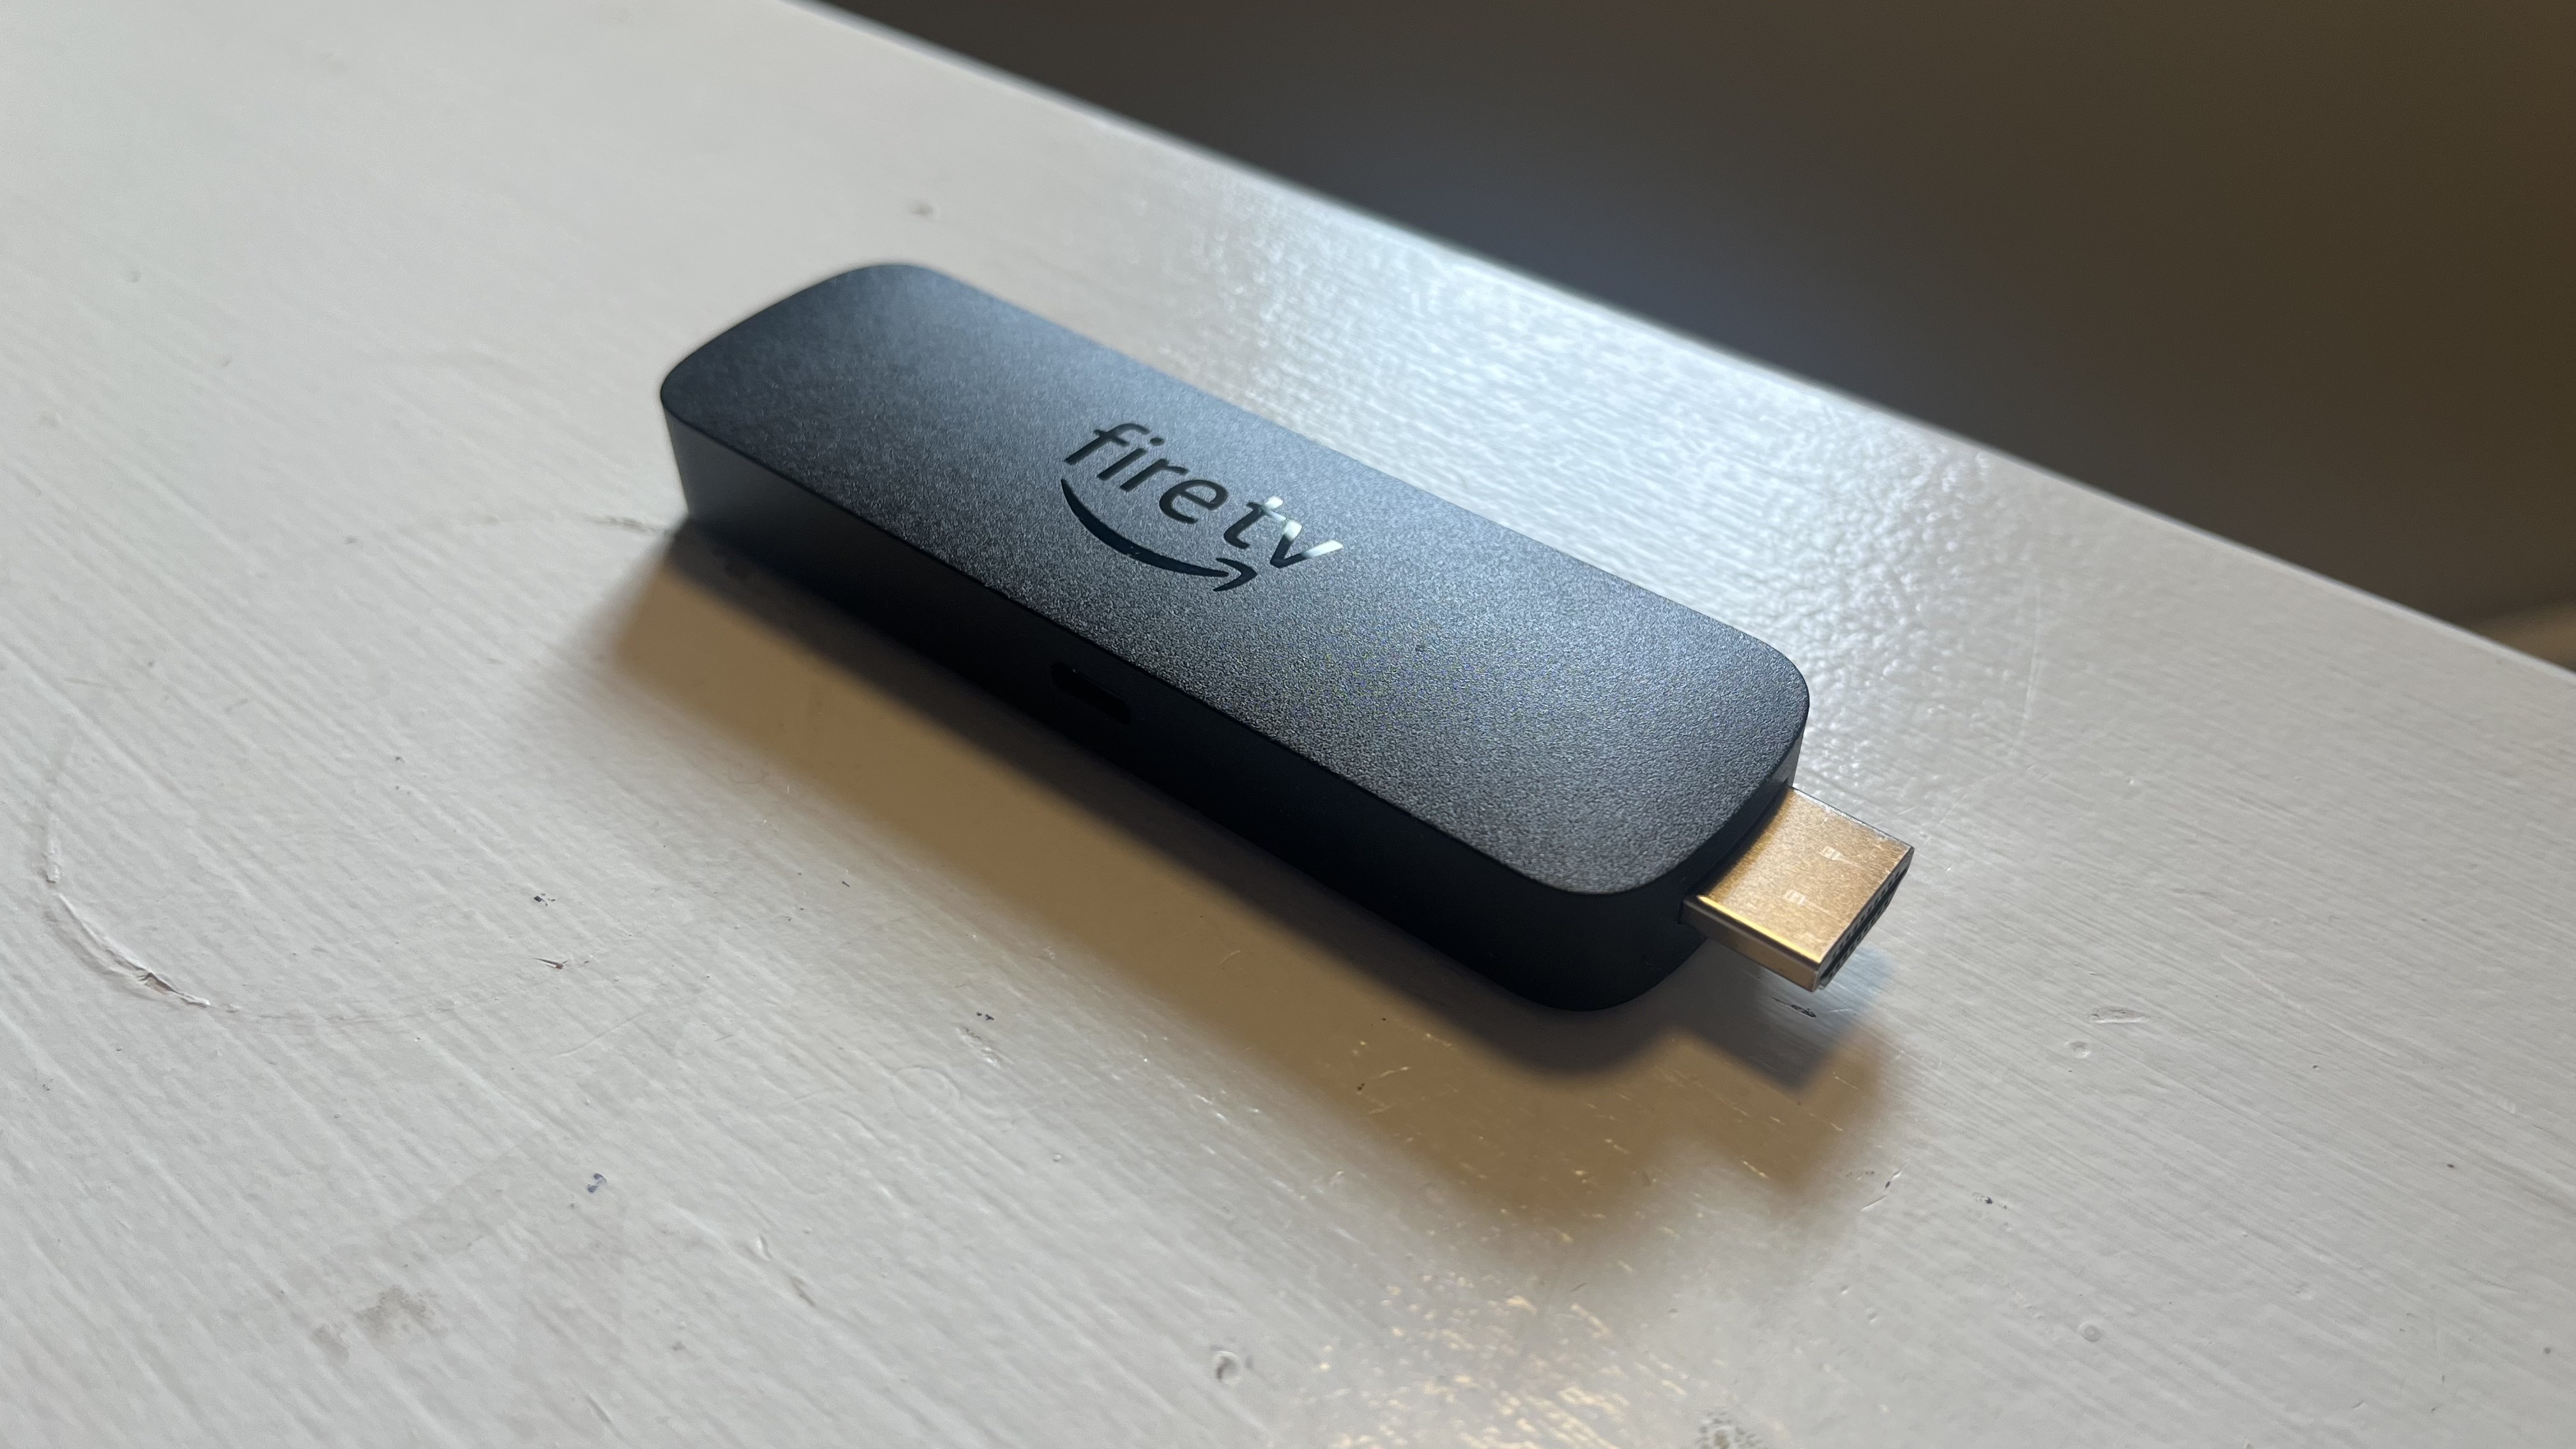 Fire TV Stick 4K Max - Review 2023 - PCMag Middle East